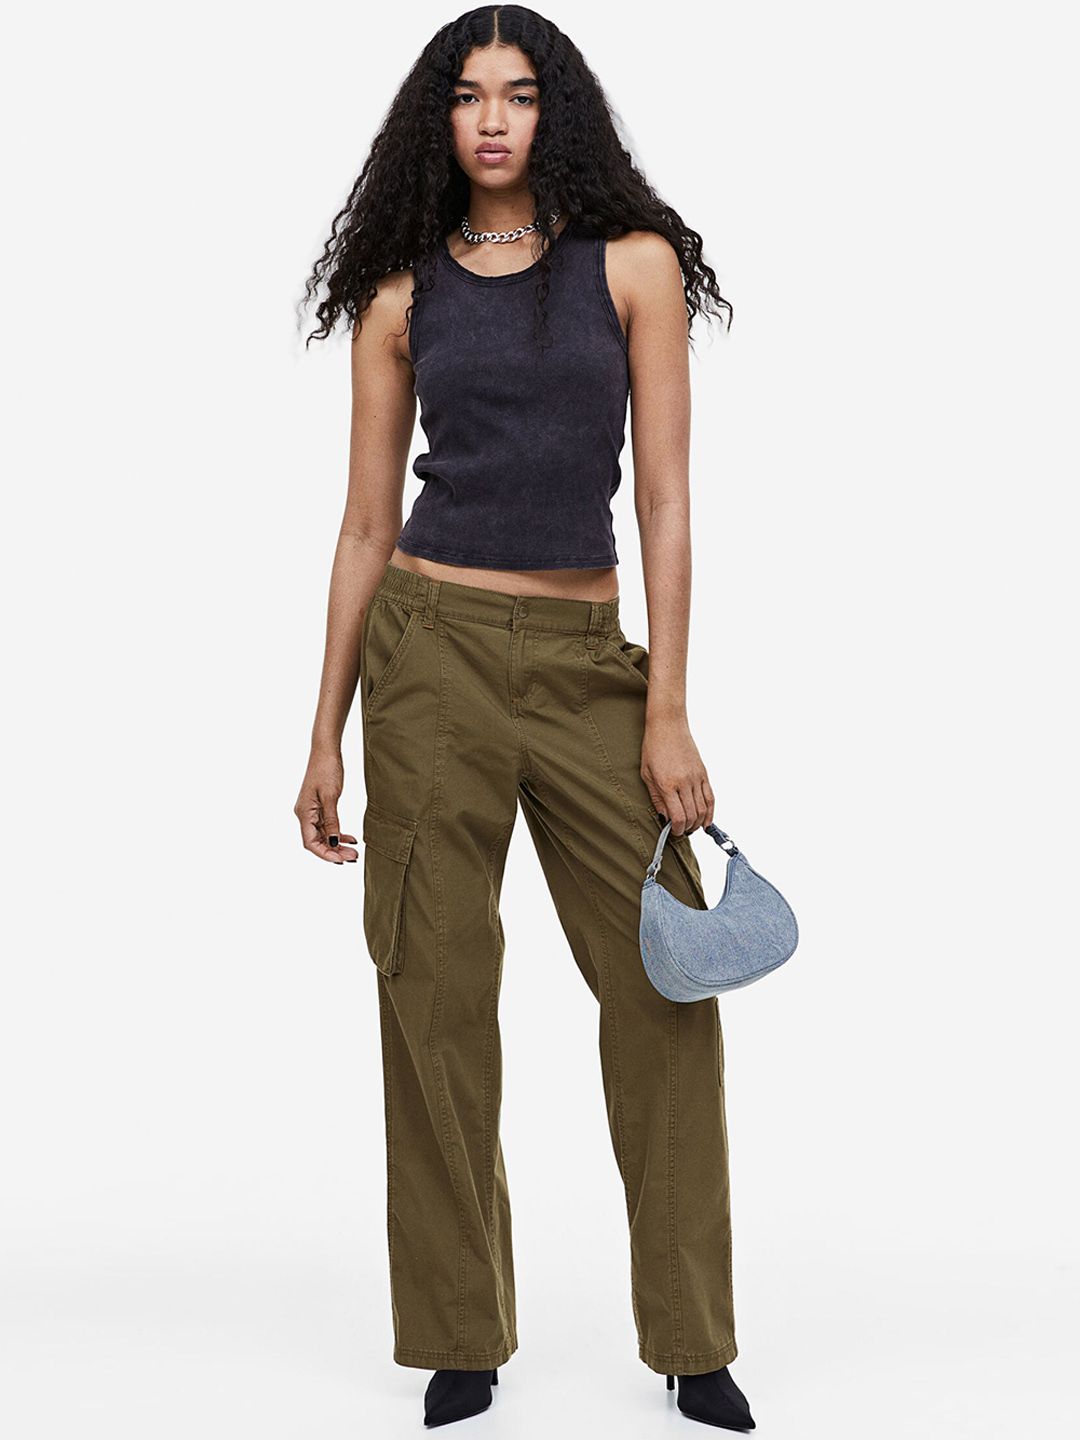 H&M Women Canvas Cargo Trousers Price in India